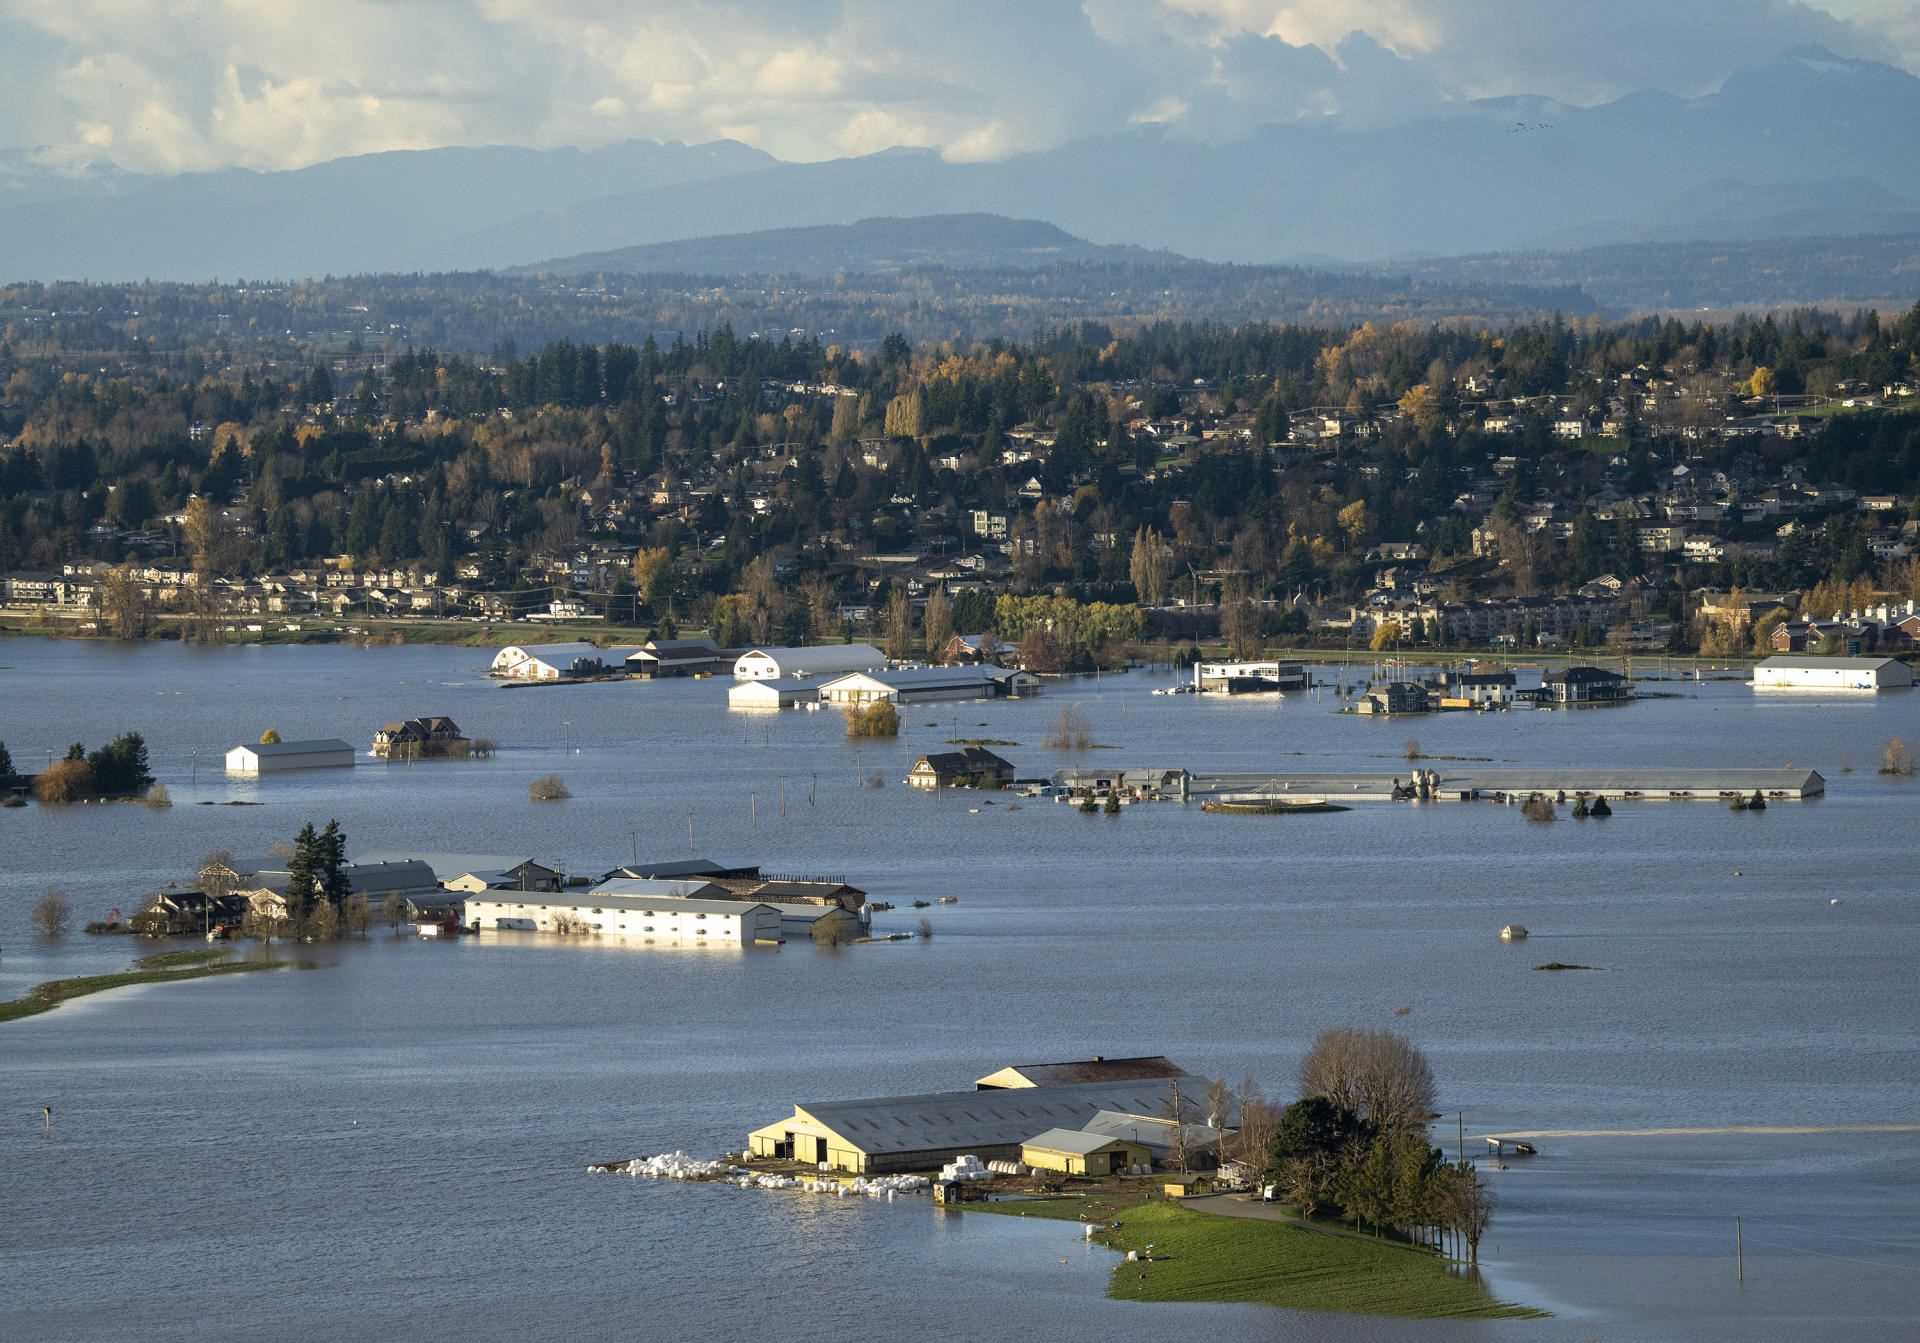 Properties flooded due to flooding in Abbotsford, British Columbia on November 16, 2021.